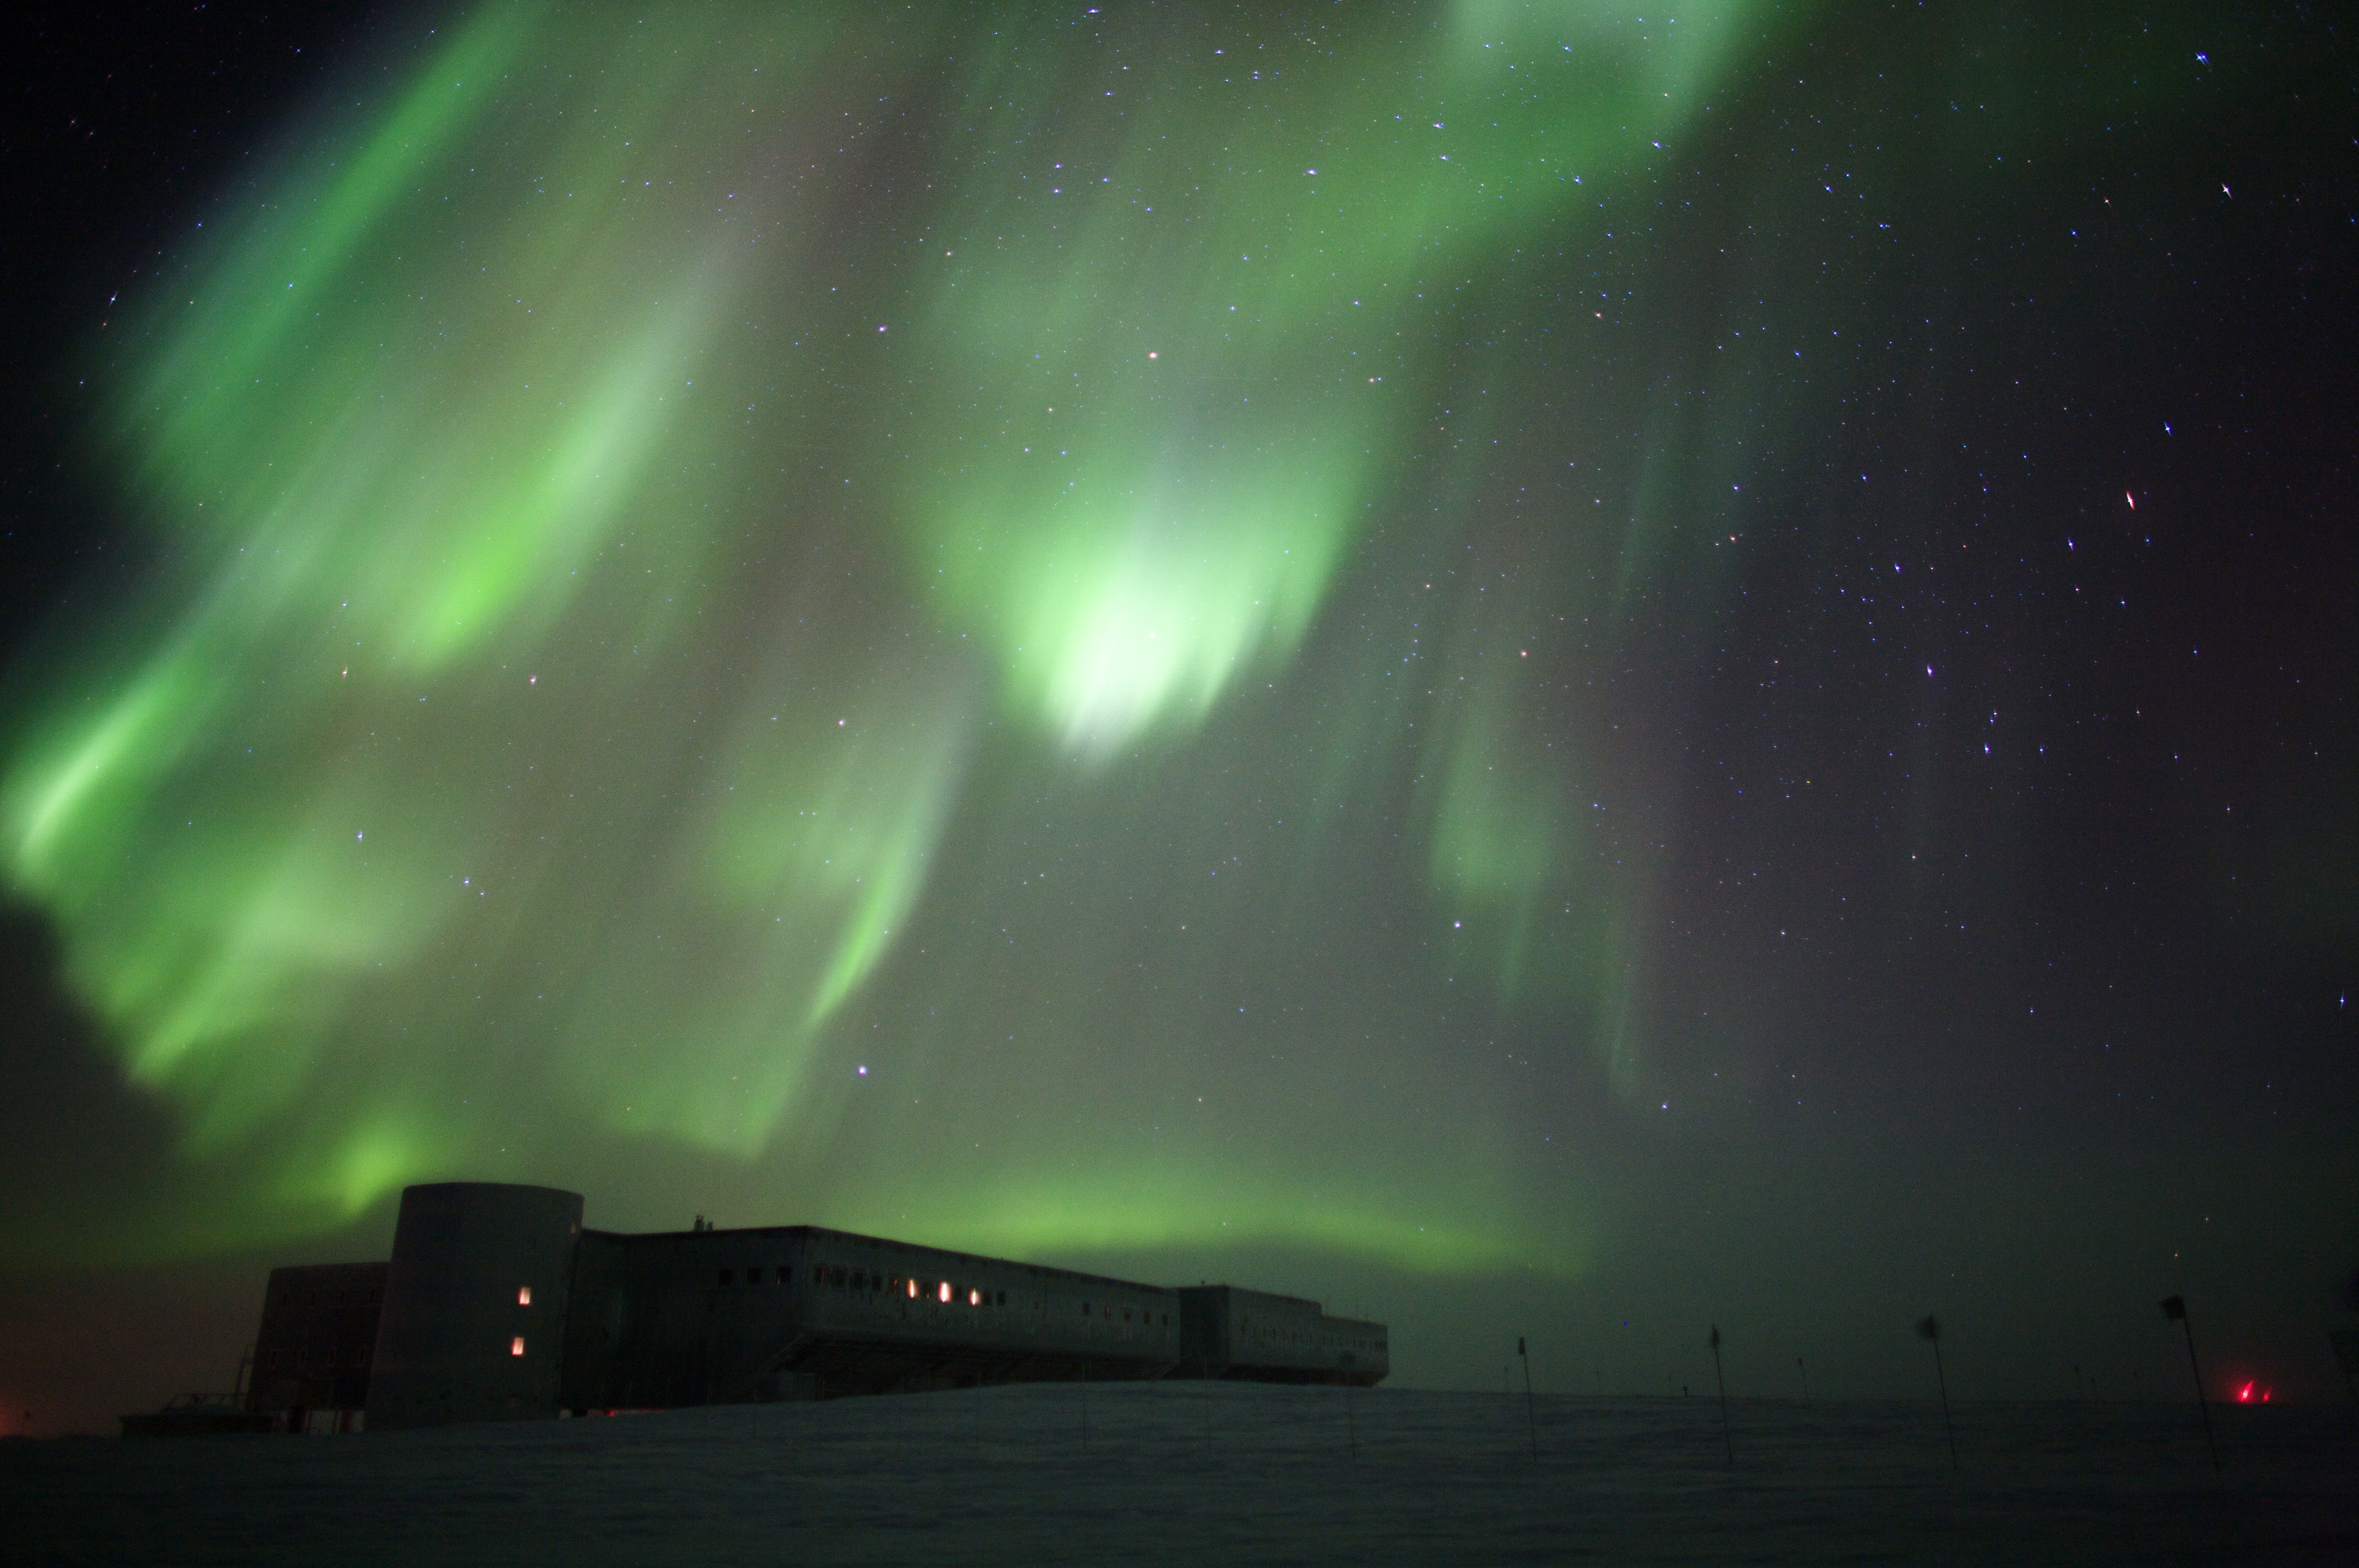 Shimmery auroras over South Pole station